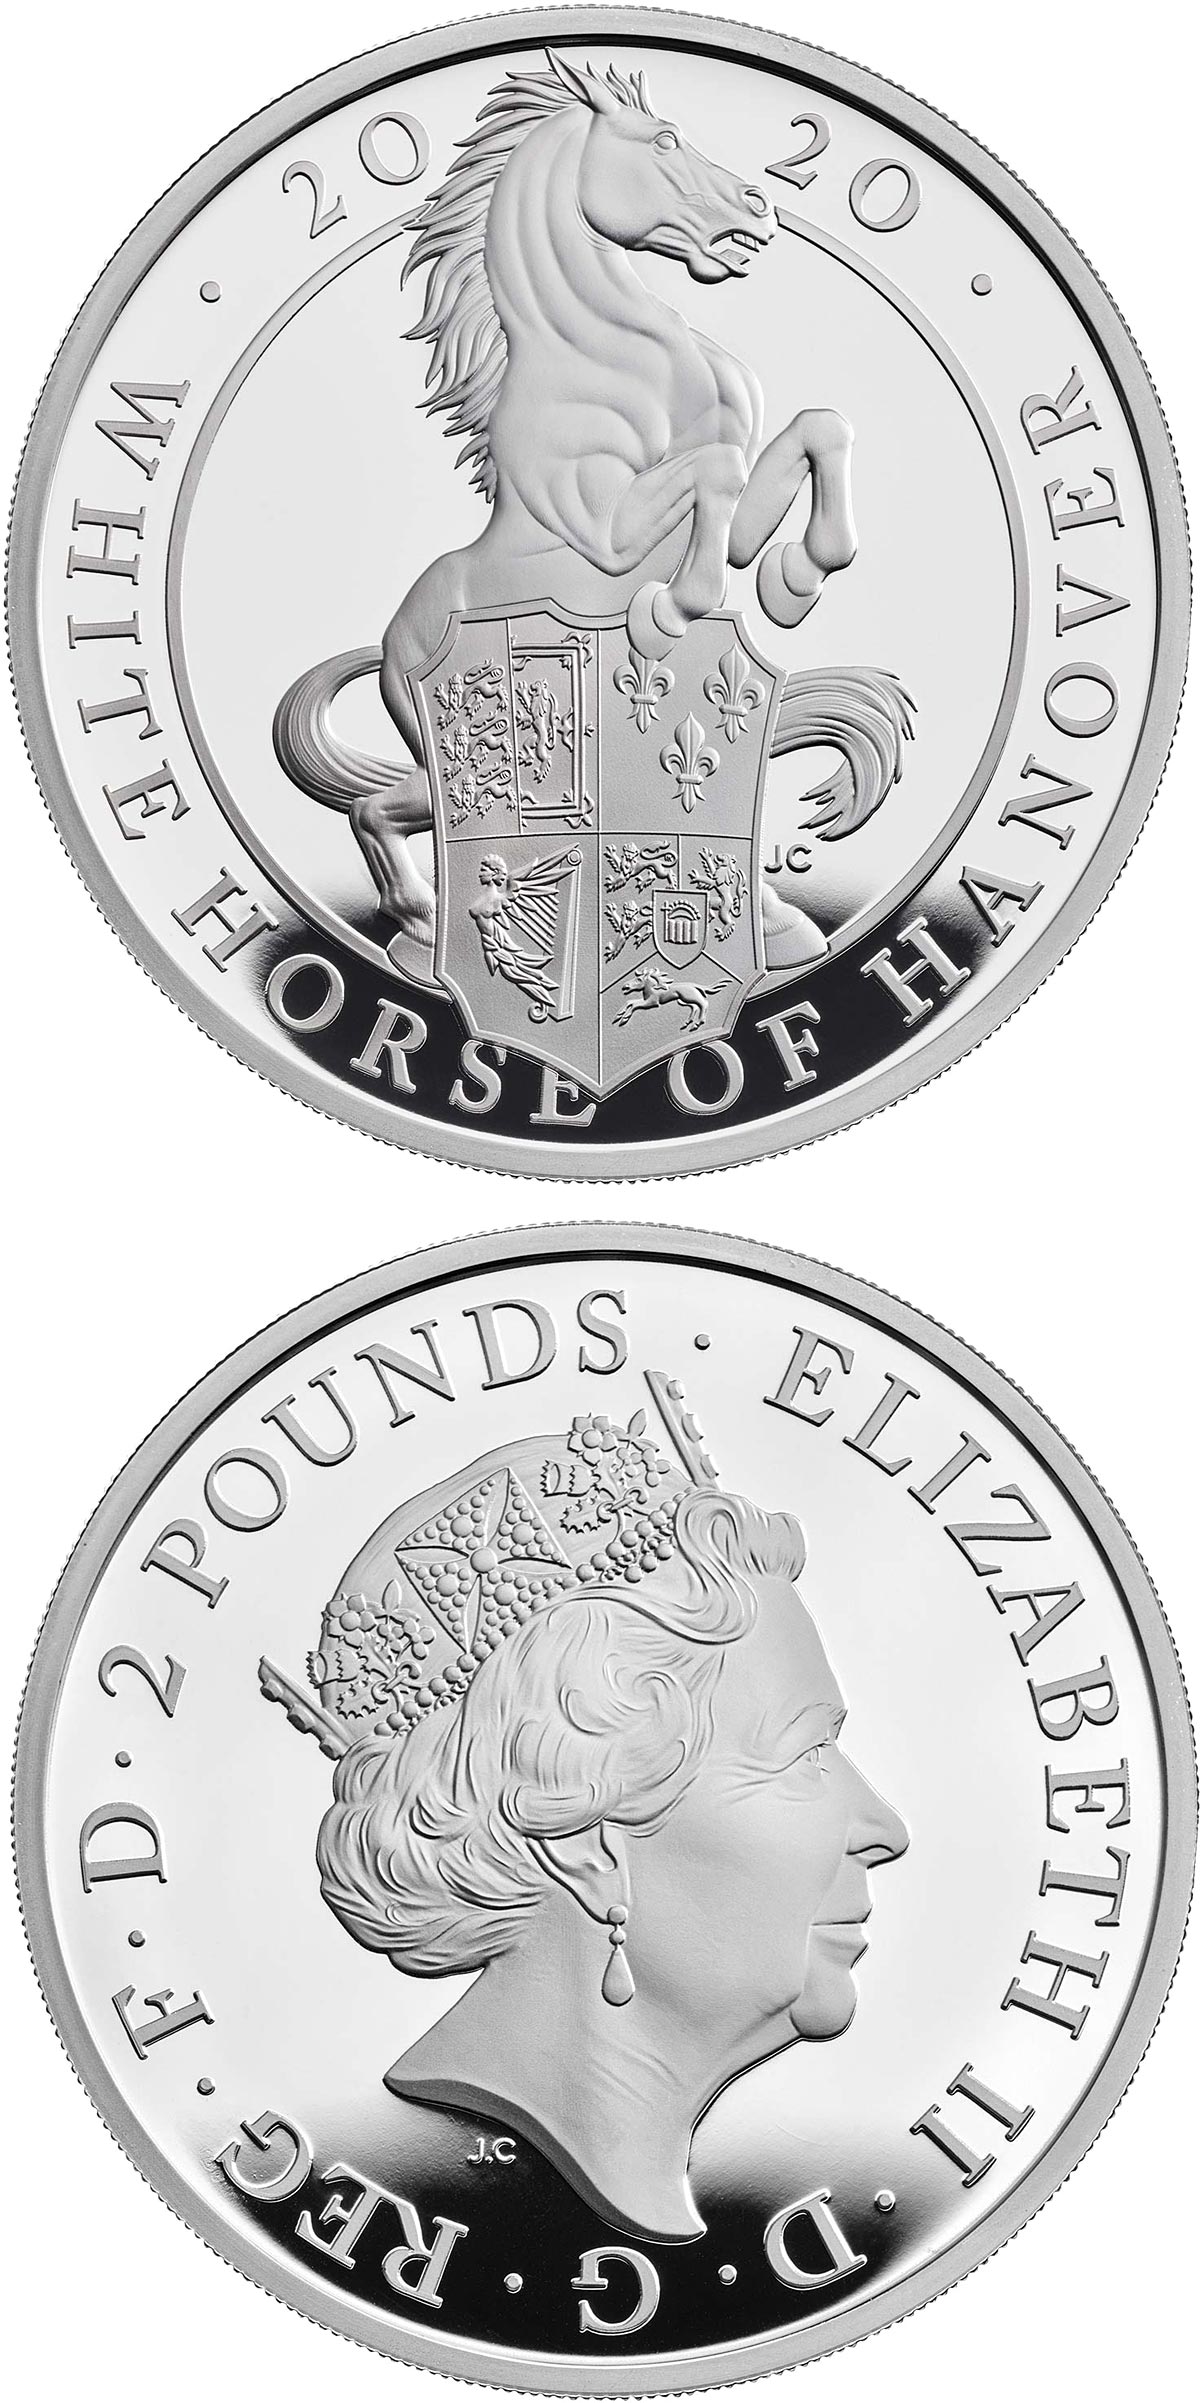 Image of 2 pounds coin - The White Horse of Hanover  | United Kingdom 2020.  The Silver coin is of Proof quality.